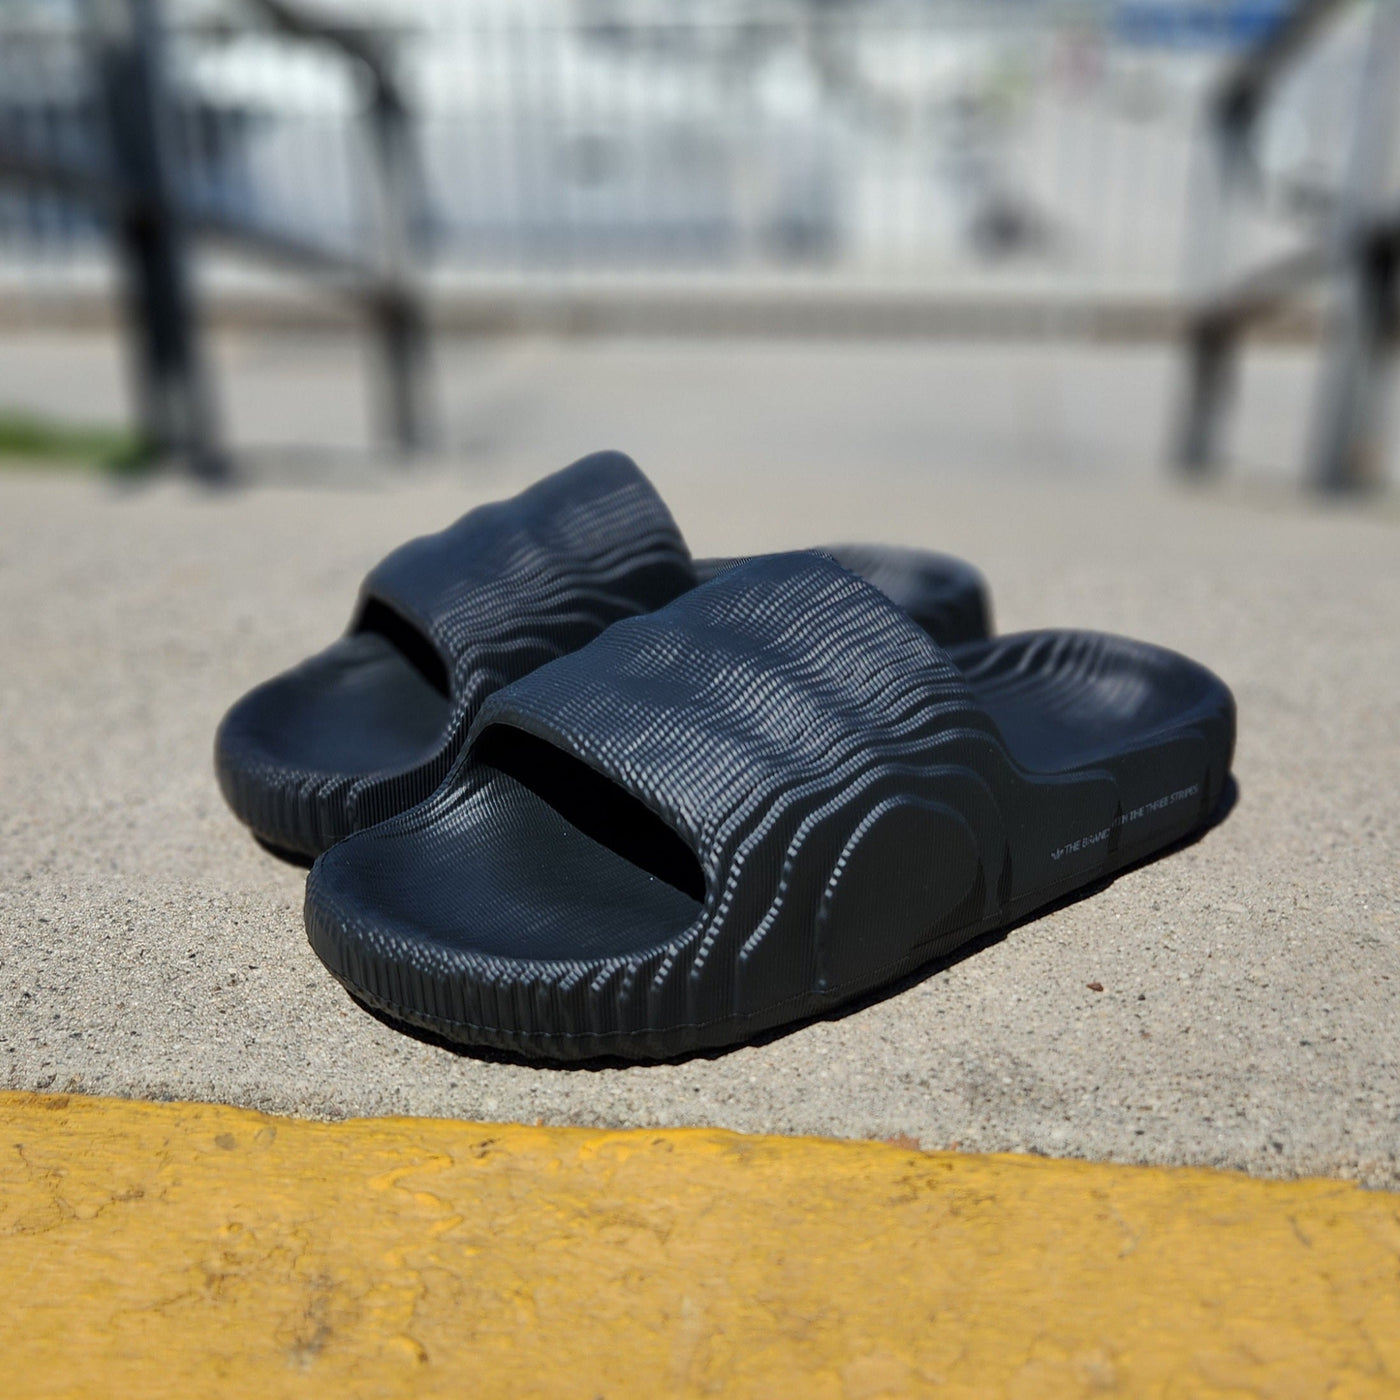 The New YEEZY Slide! Adidas Adilette 22 Slide Review & On Foot